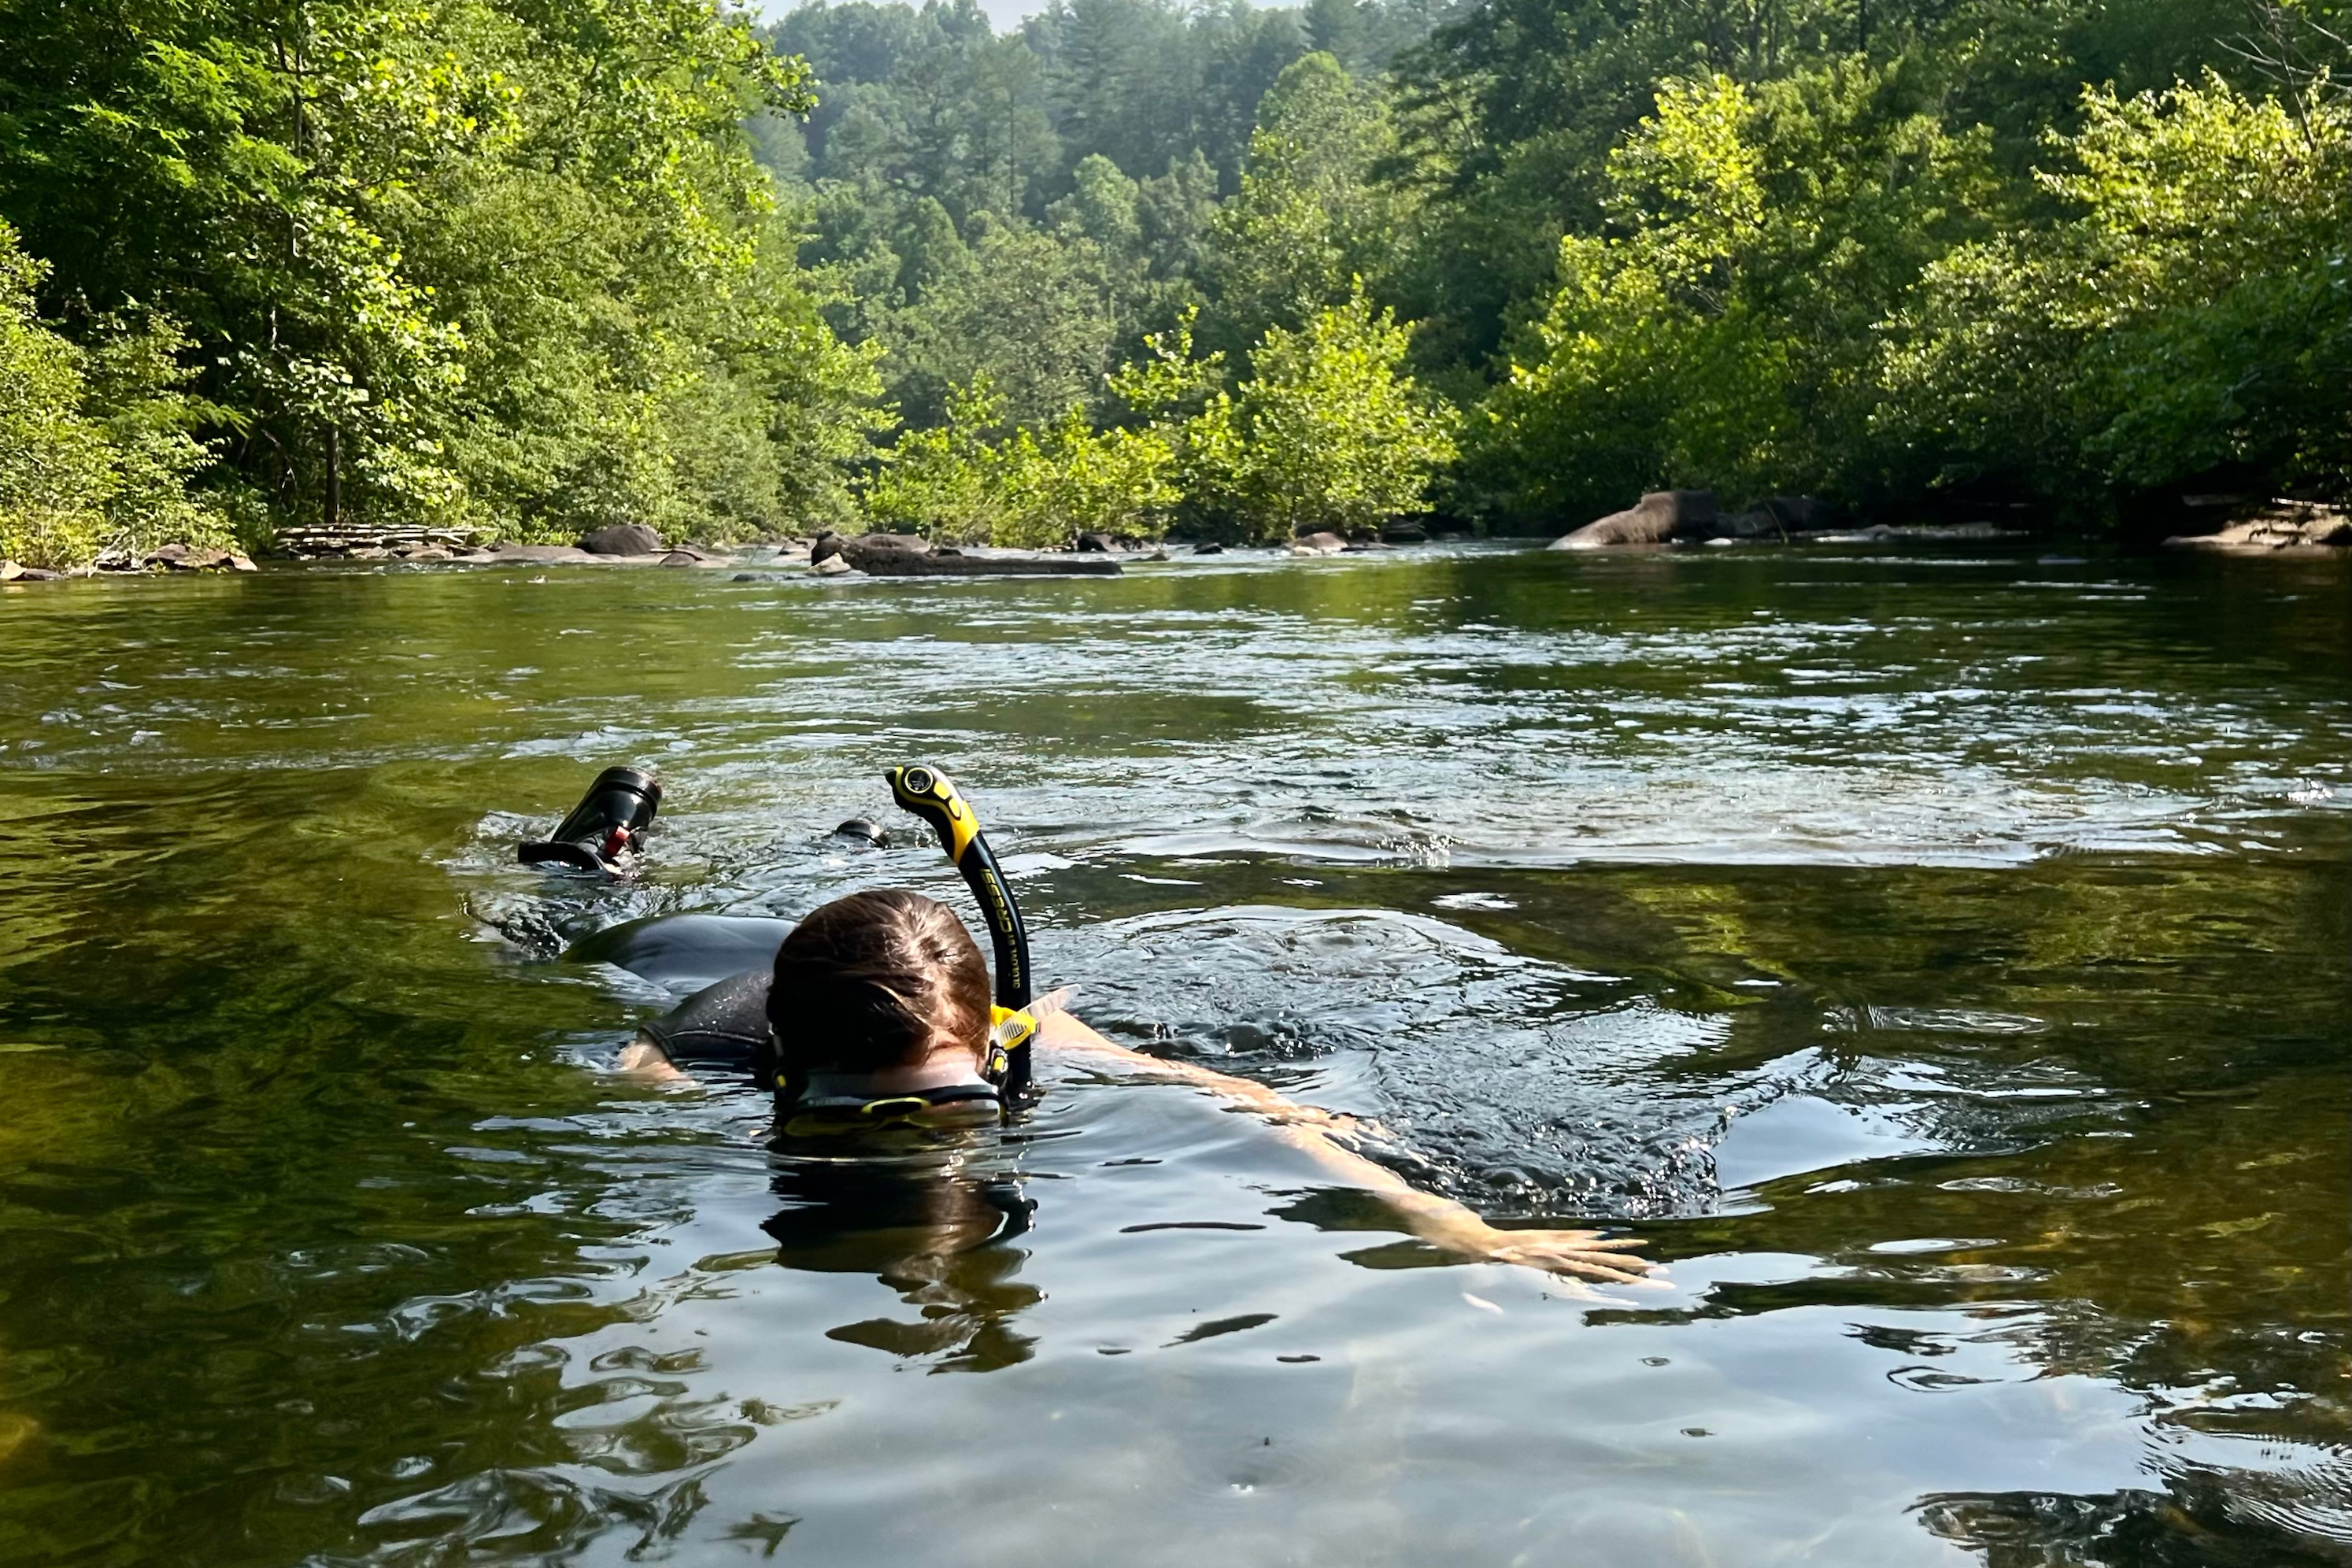 A woman snorkels in shallow water in a river with trees behind her